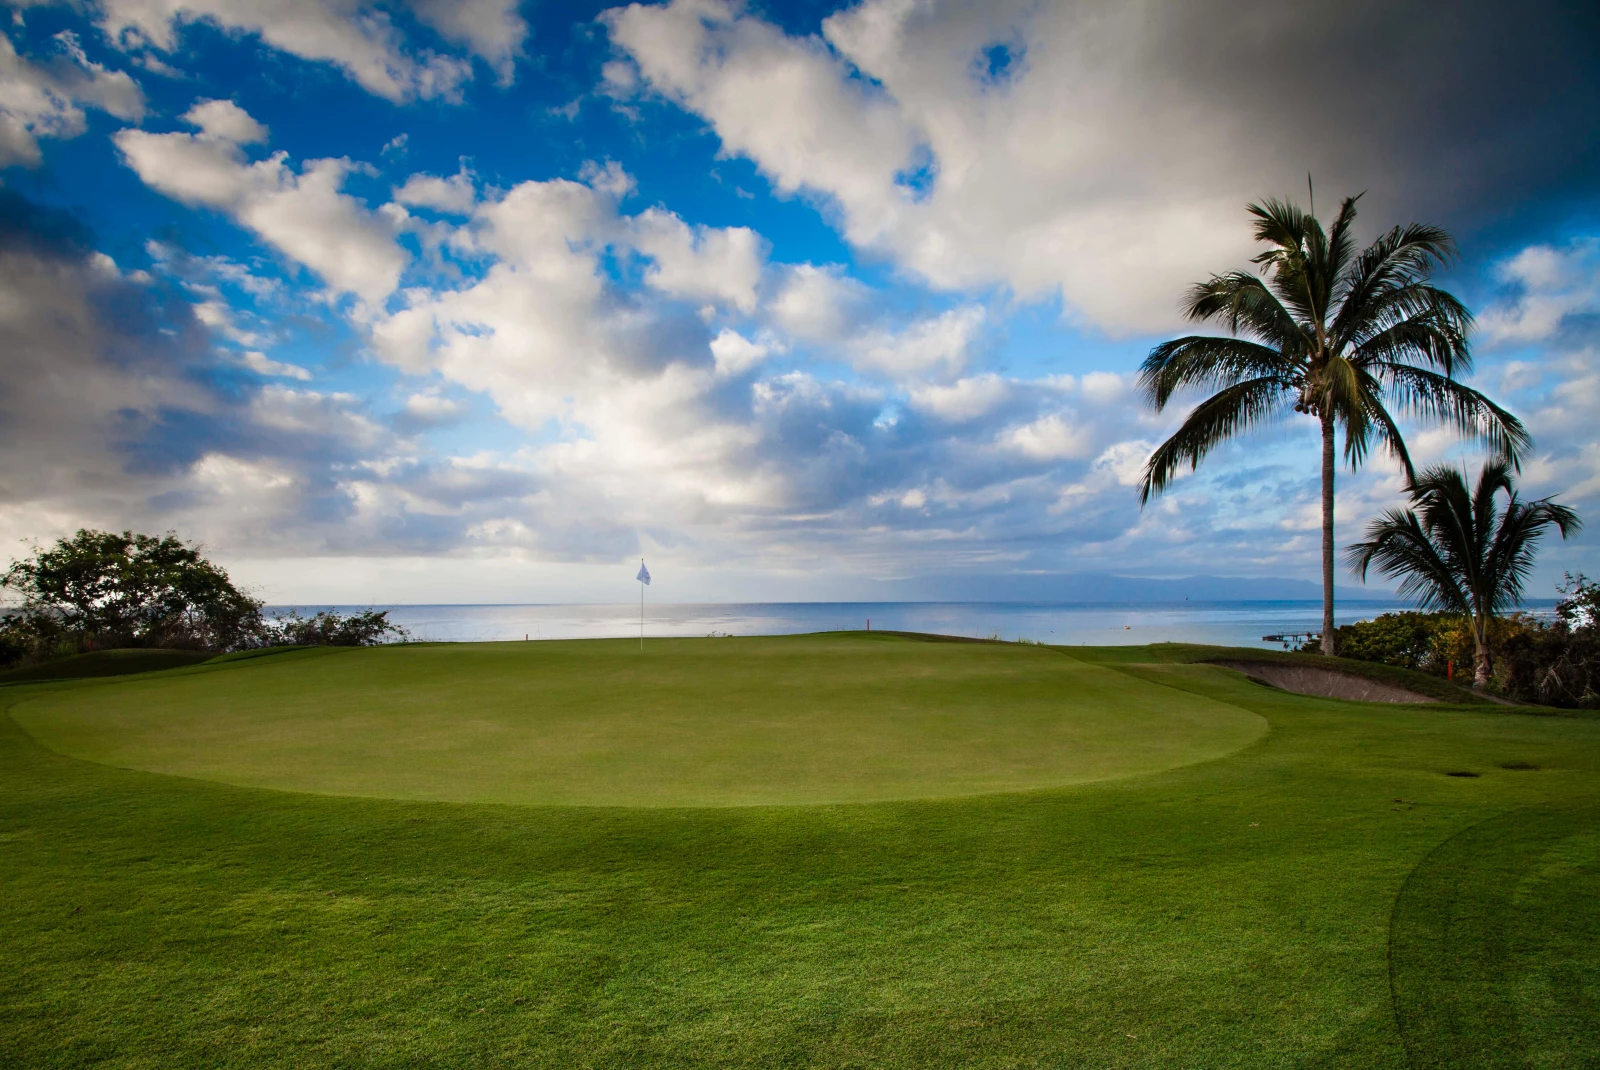 golf course with palm trees overlooking the ocean